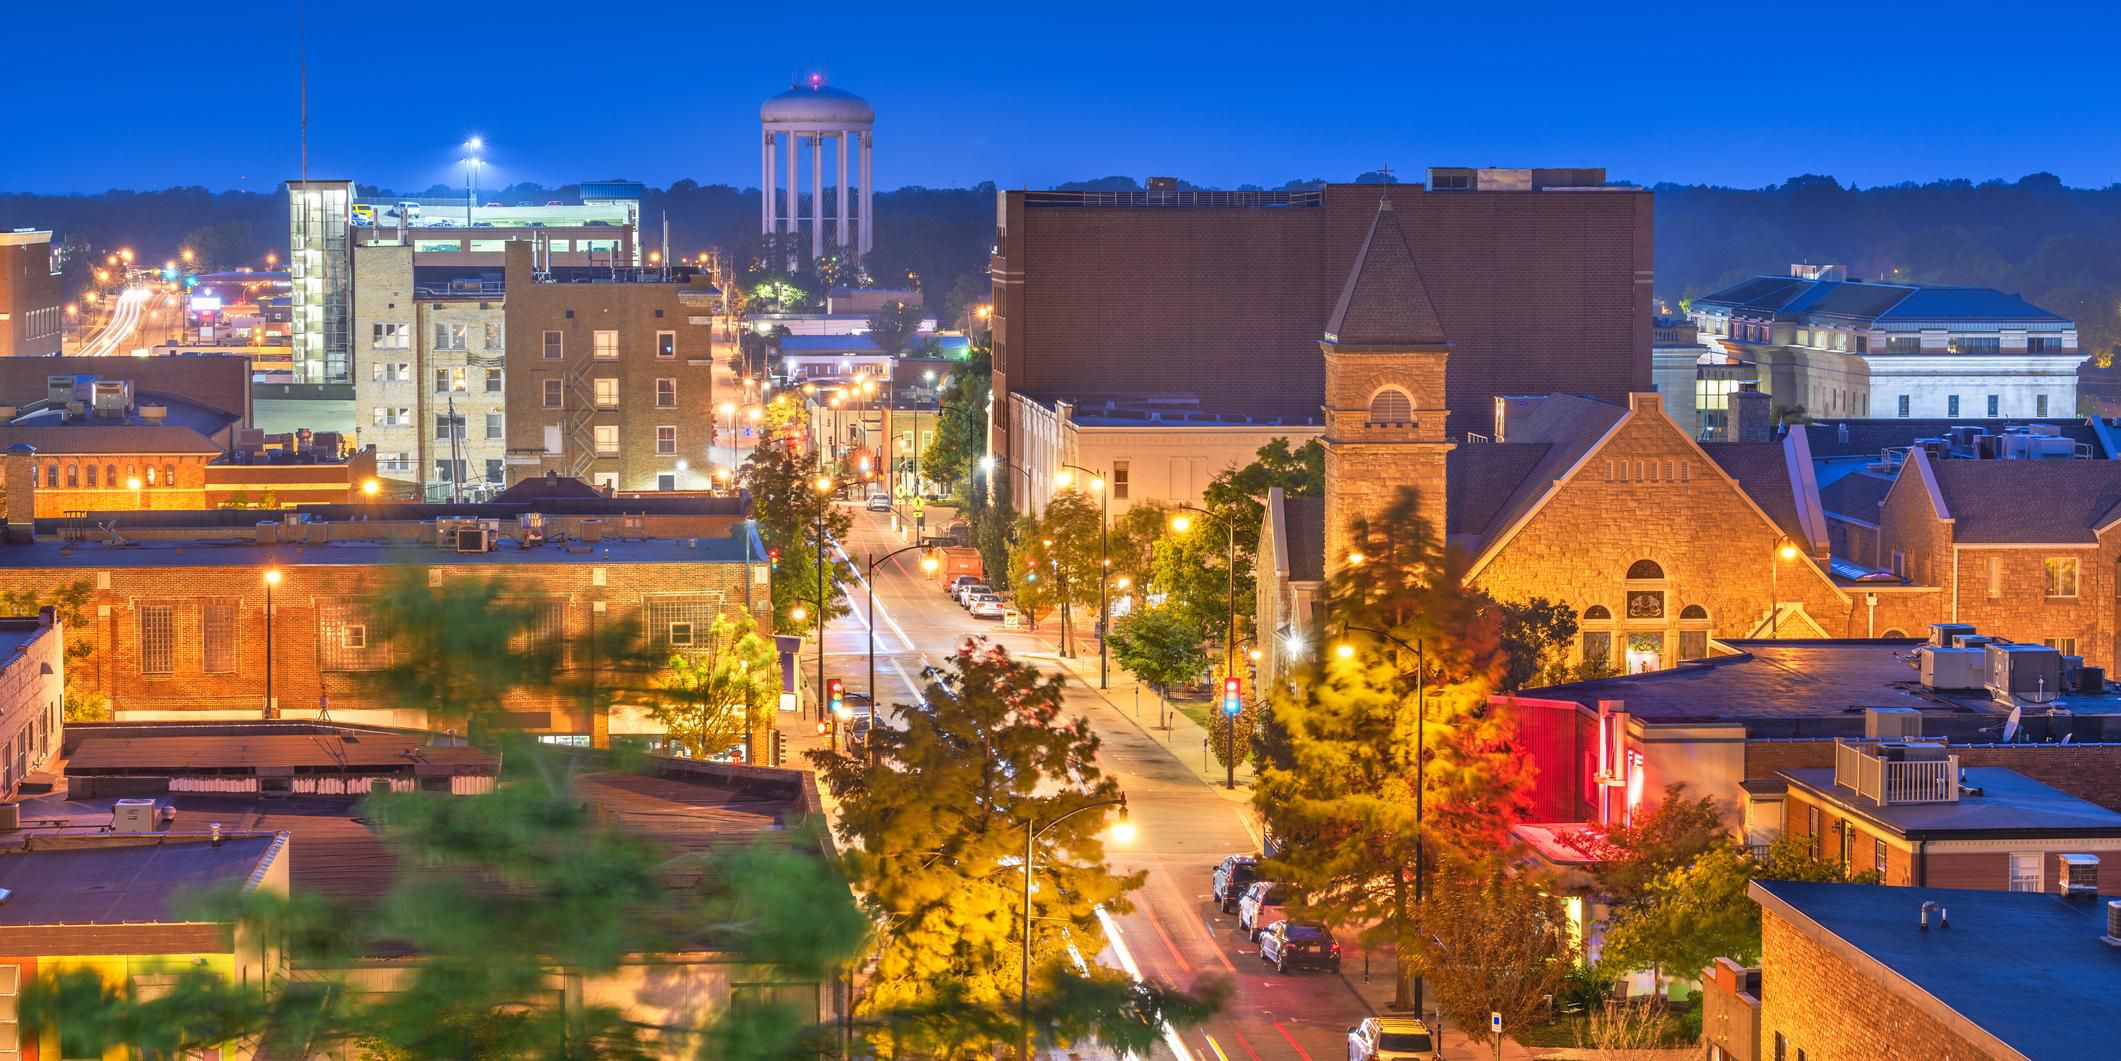 Our hotel near the University of Missouri and downtown Columbia is mere steps from campus, making it extremely convenient for visiting prospective students and parents. We're also in the heart of The District, a lively neighborhood with great dining options. Guests will also be able to easily go downtown and see a show at the Missouri Theatre.​